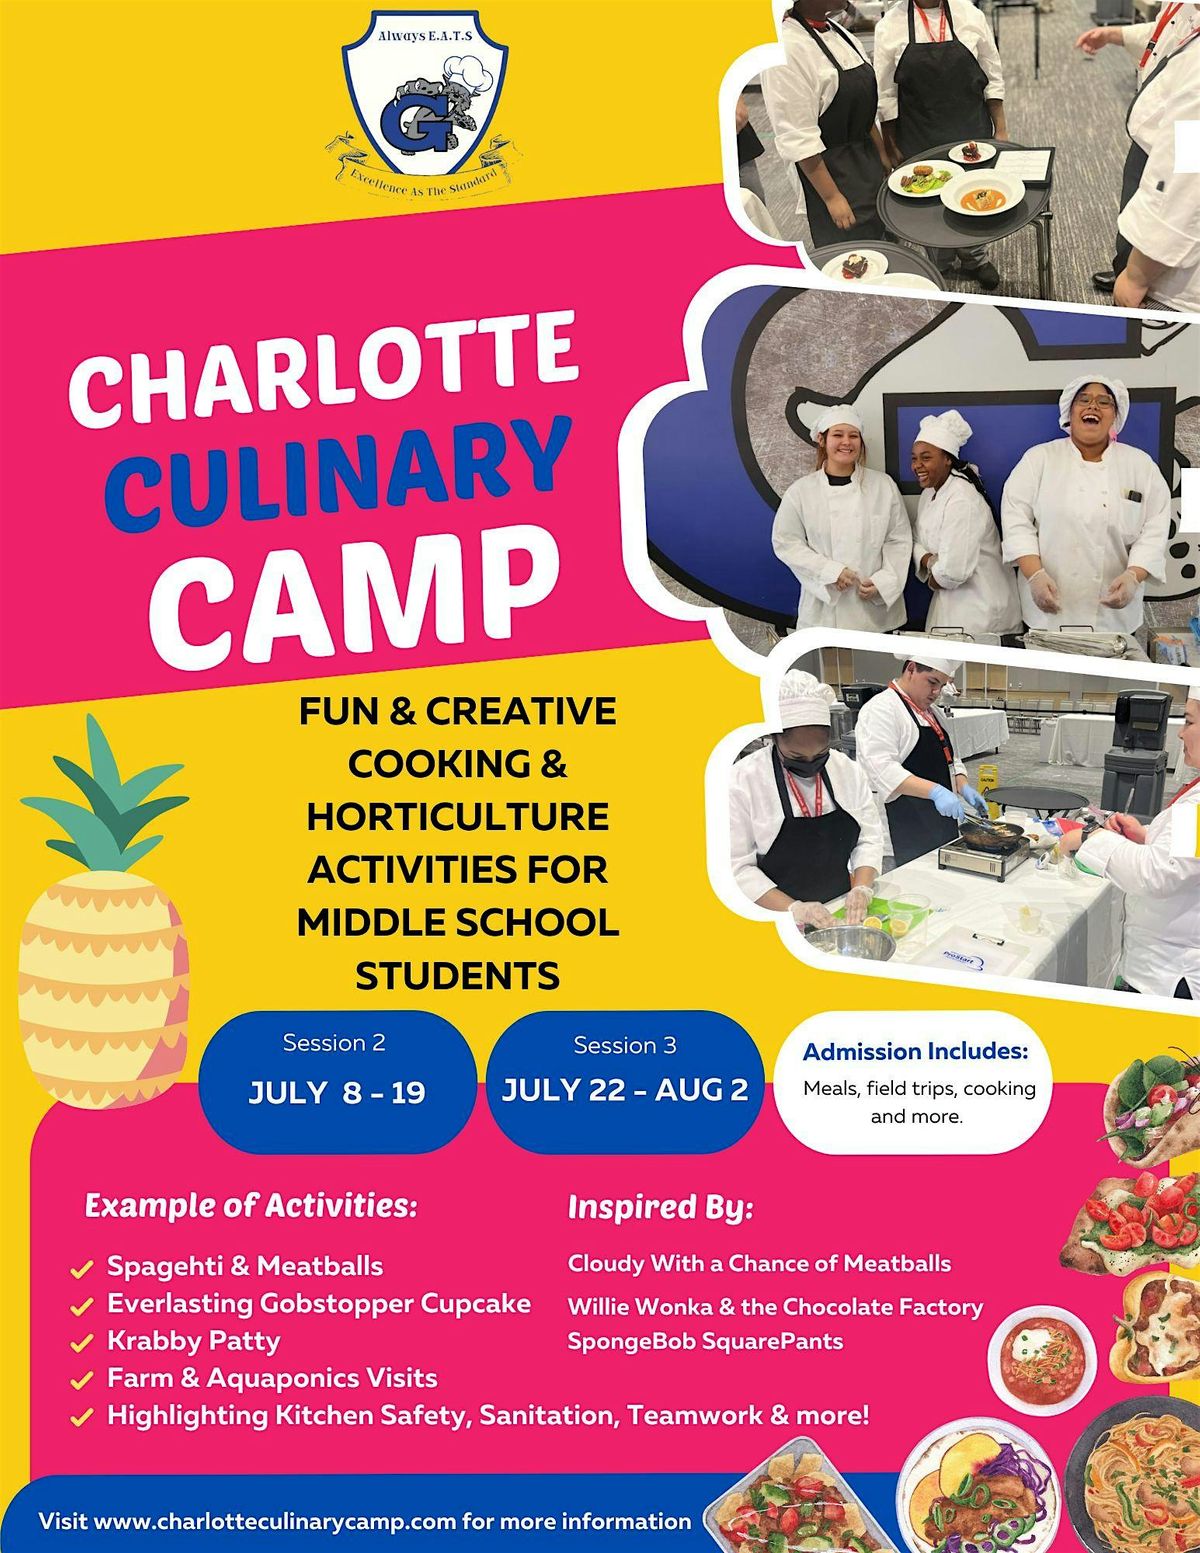 Charlotte Culinary Camp Session 2